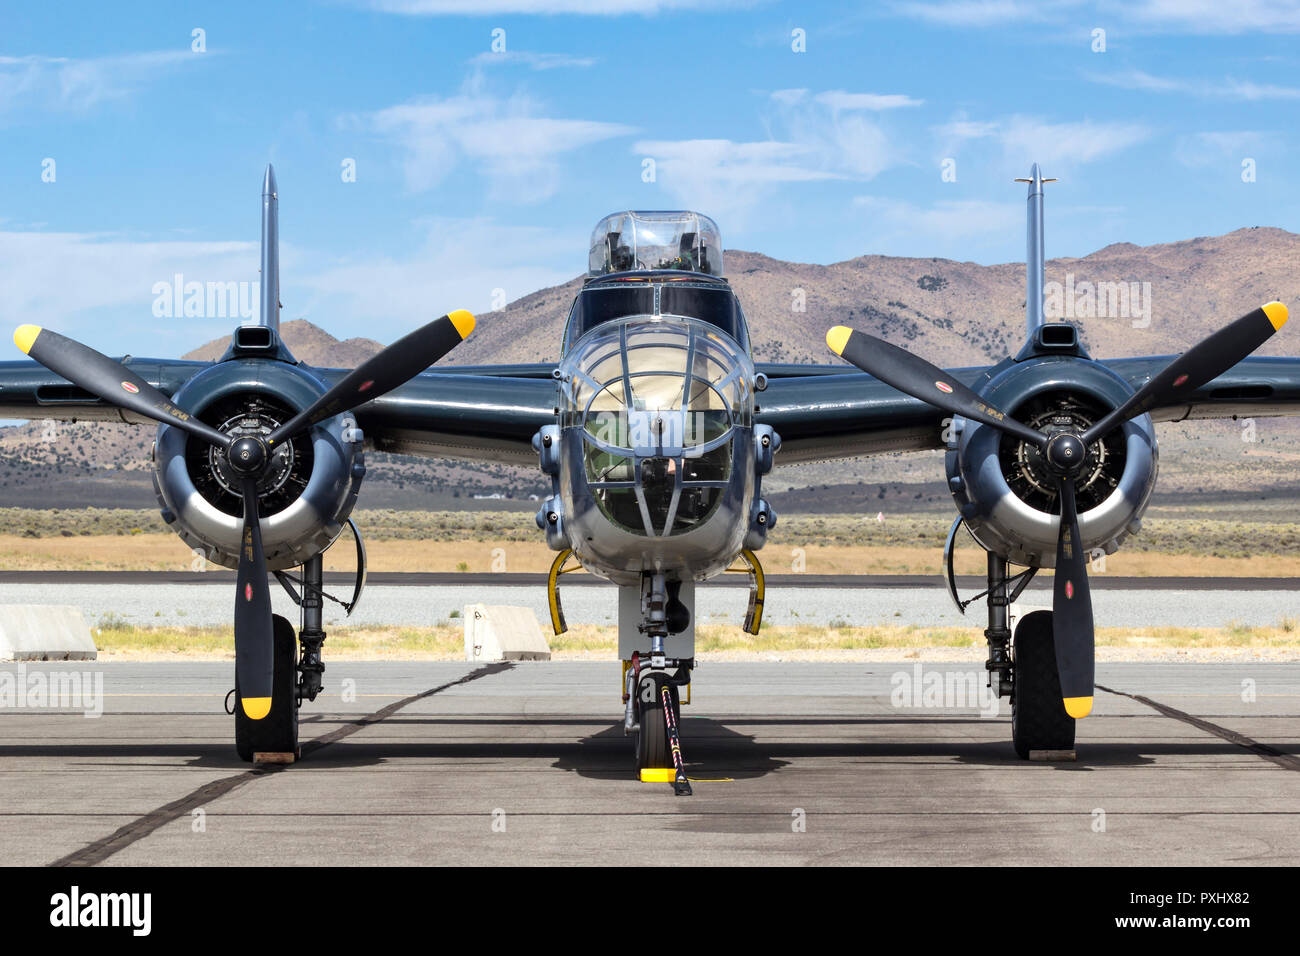 North American B-25 Mitchell medium bomber sits on the ramp at Reno-Stead Airport in Nevada. Stock Photo